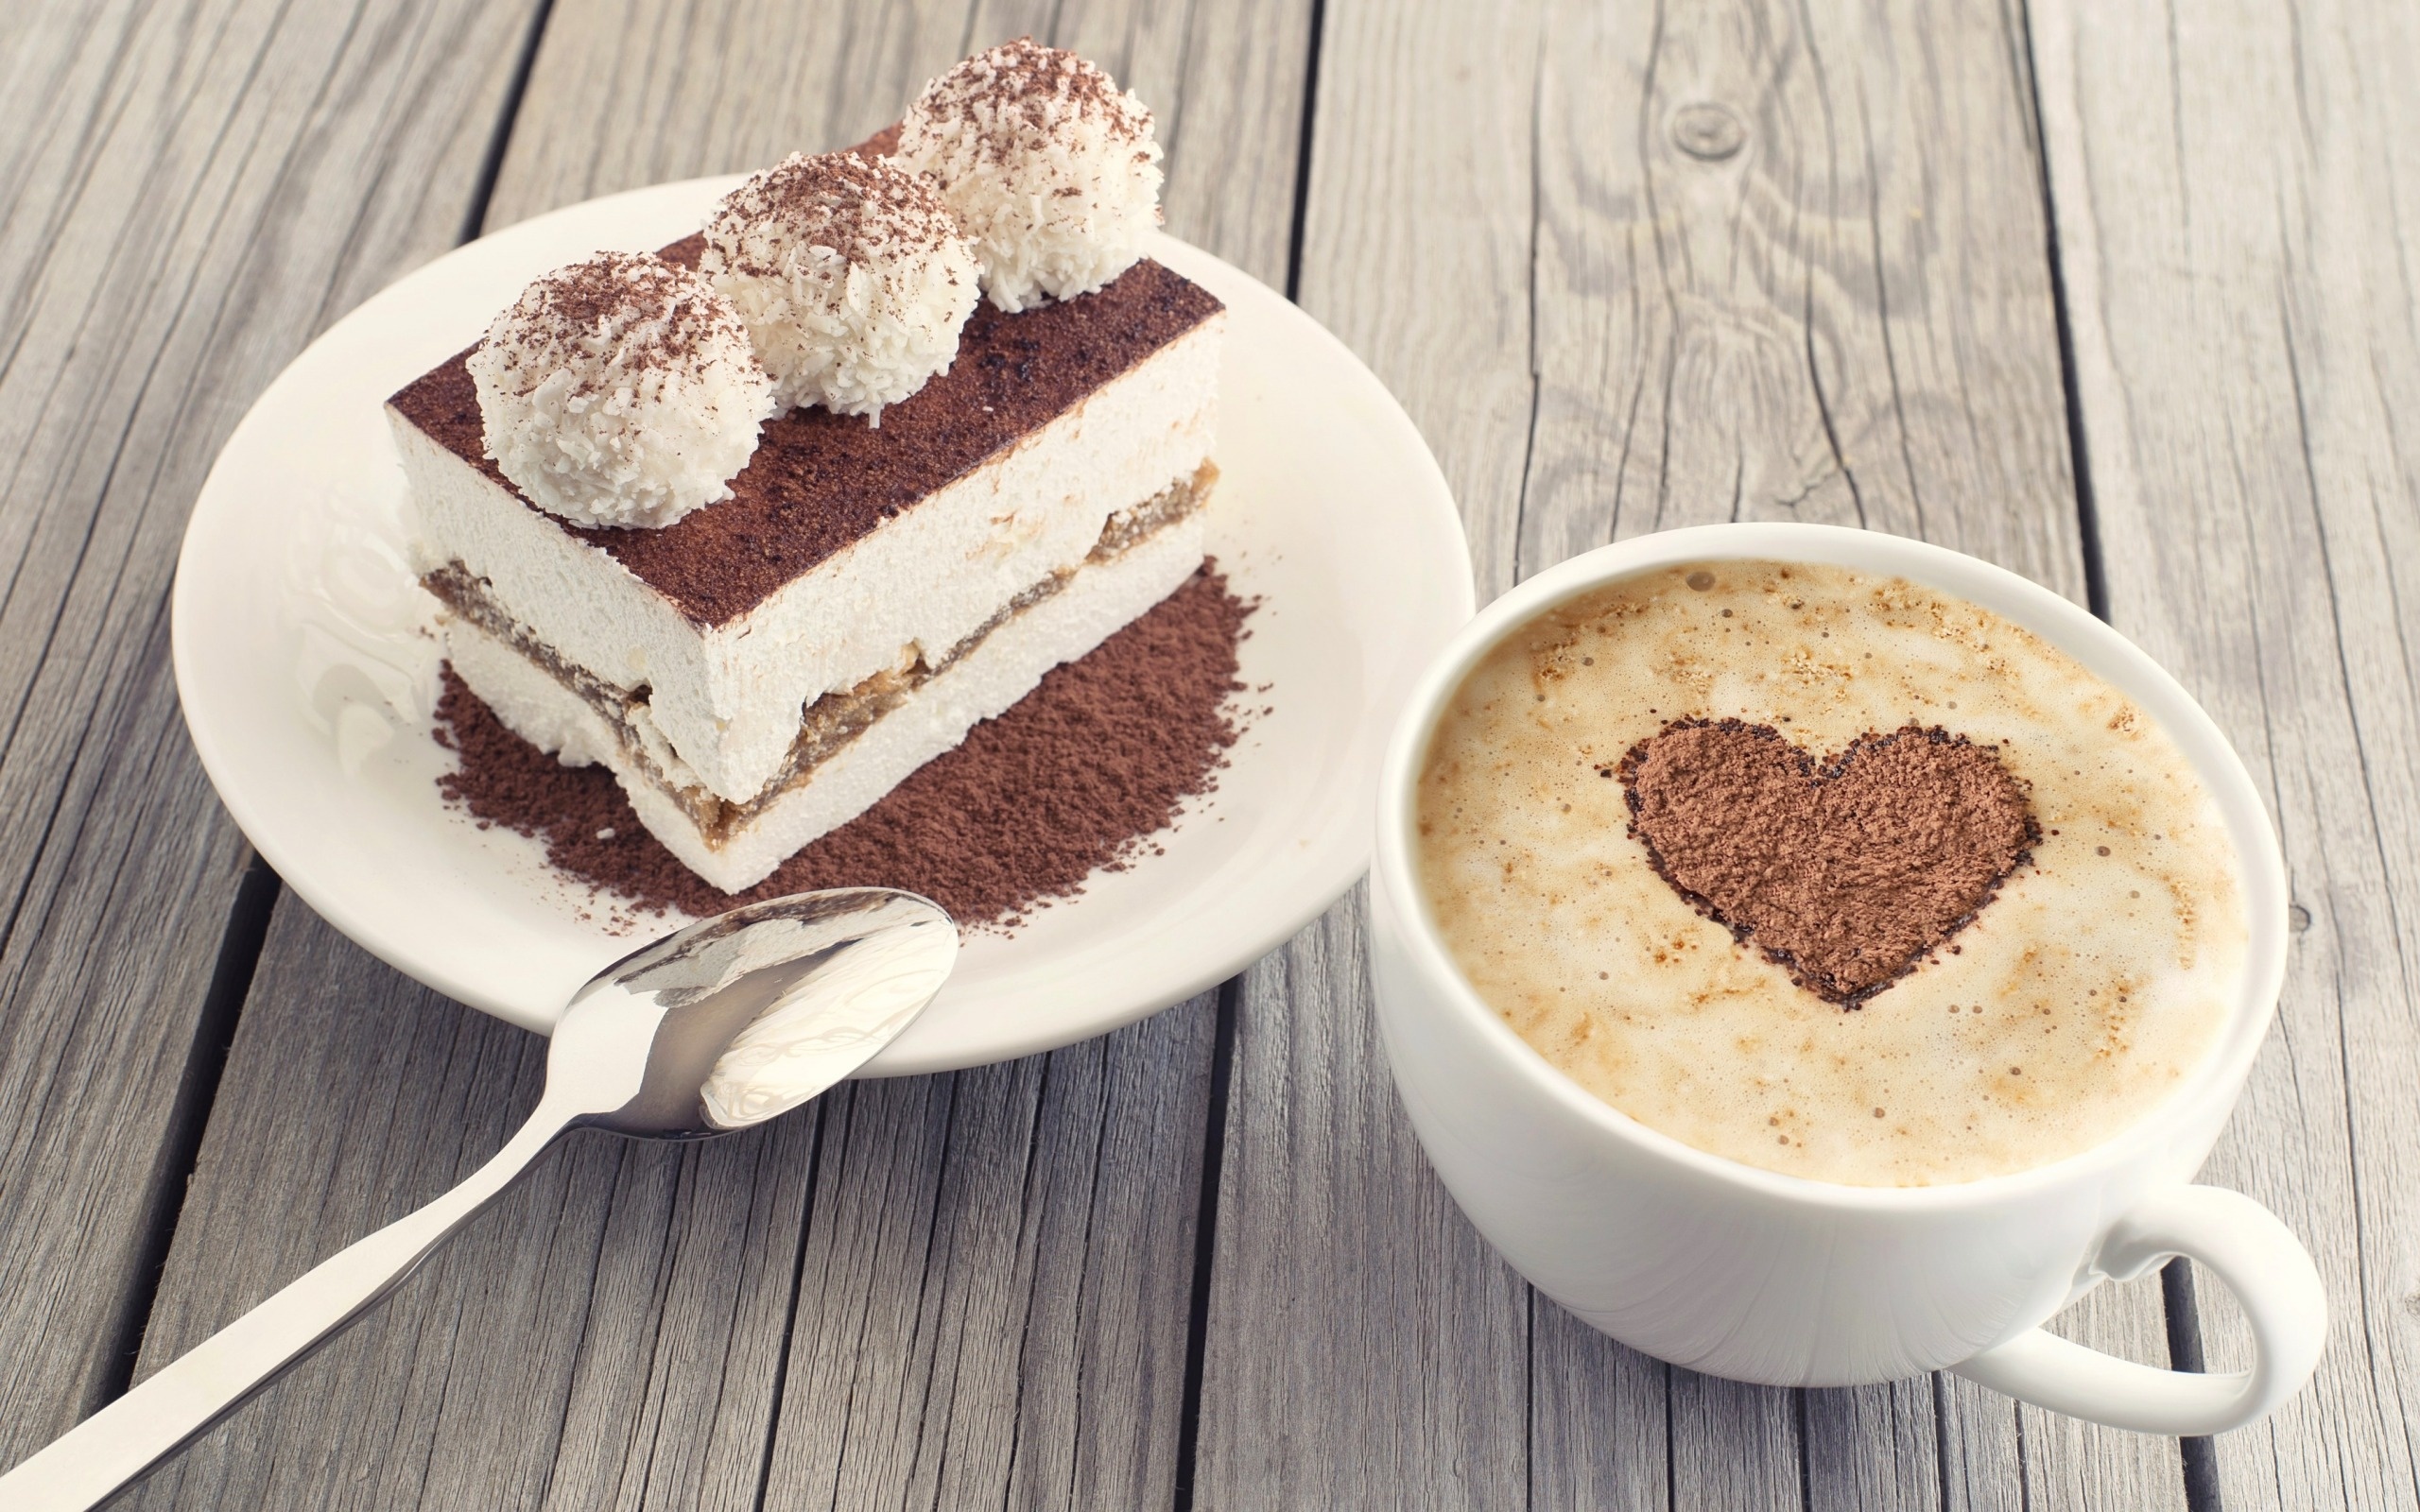 Cake and coffee, Latte art, Satisfying sweets, High-quality pictures, 2560x1600 HD Desktop